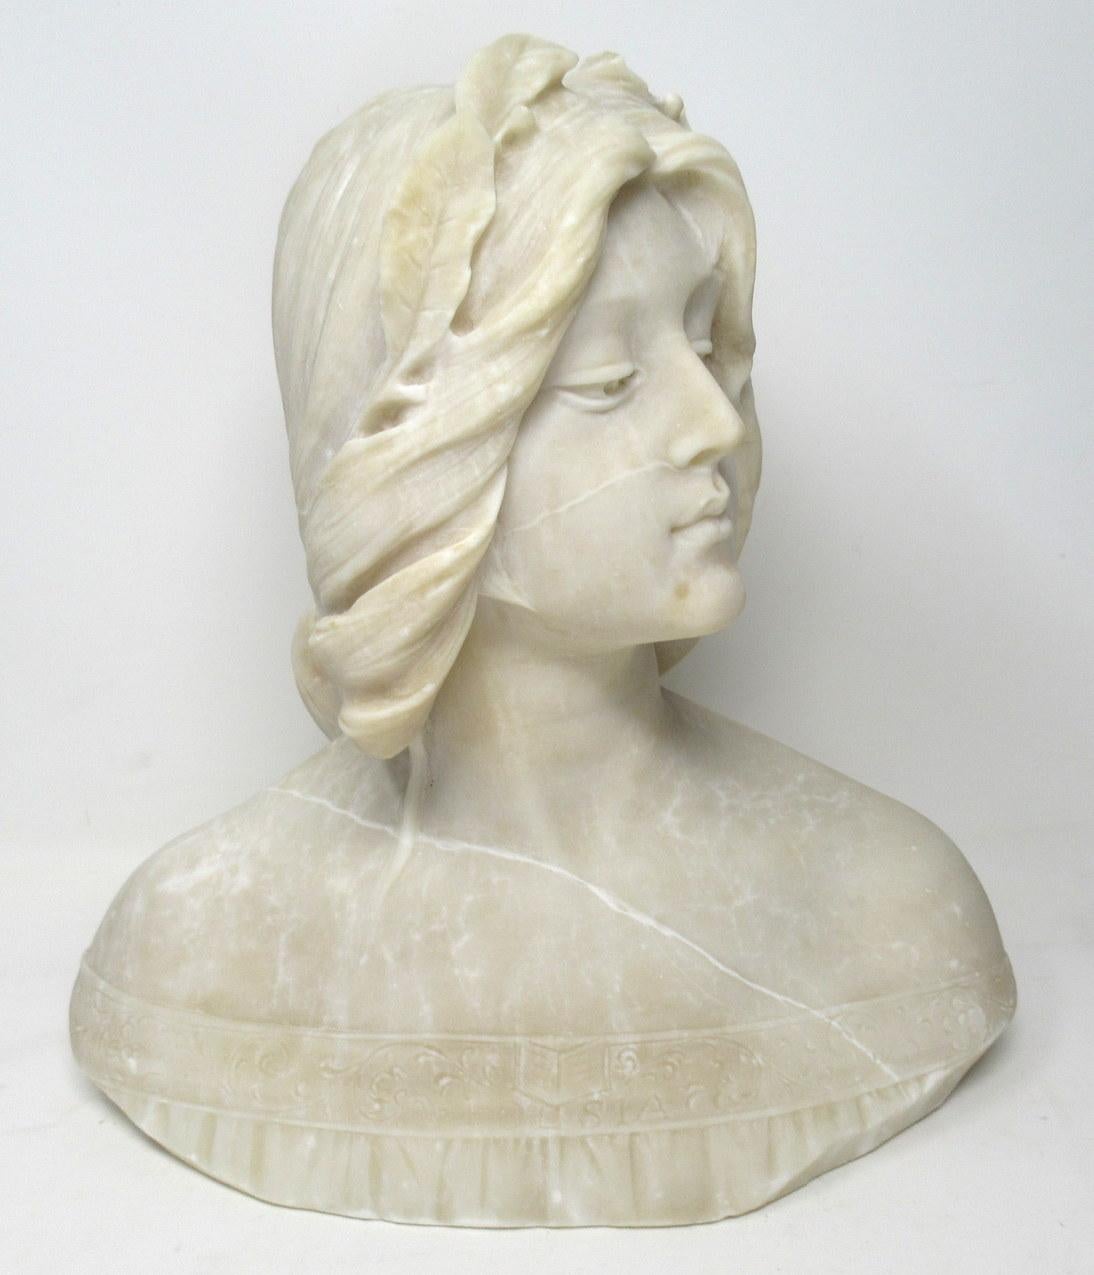 An exceptionally fine quality Italian highly detailed carved alabaster portrait sculpture bust of an elegant lady by Emilio Fiaschi (1858-1941) signed at back. Last quarter of the 19th century.

Condition: Old professional restoration in two